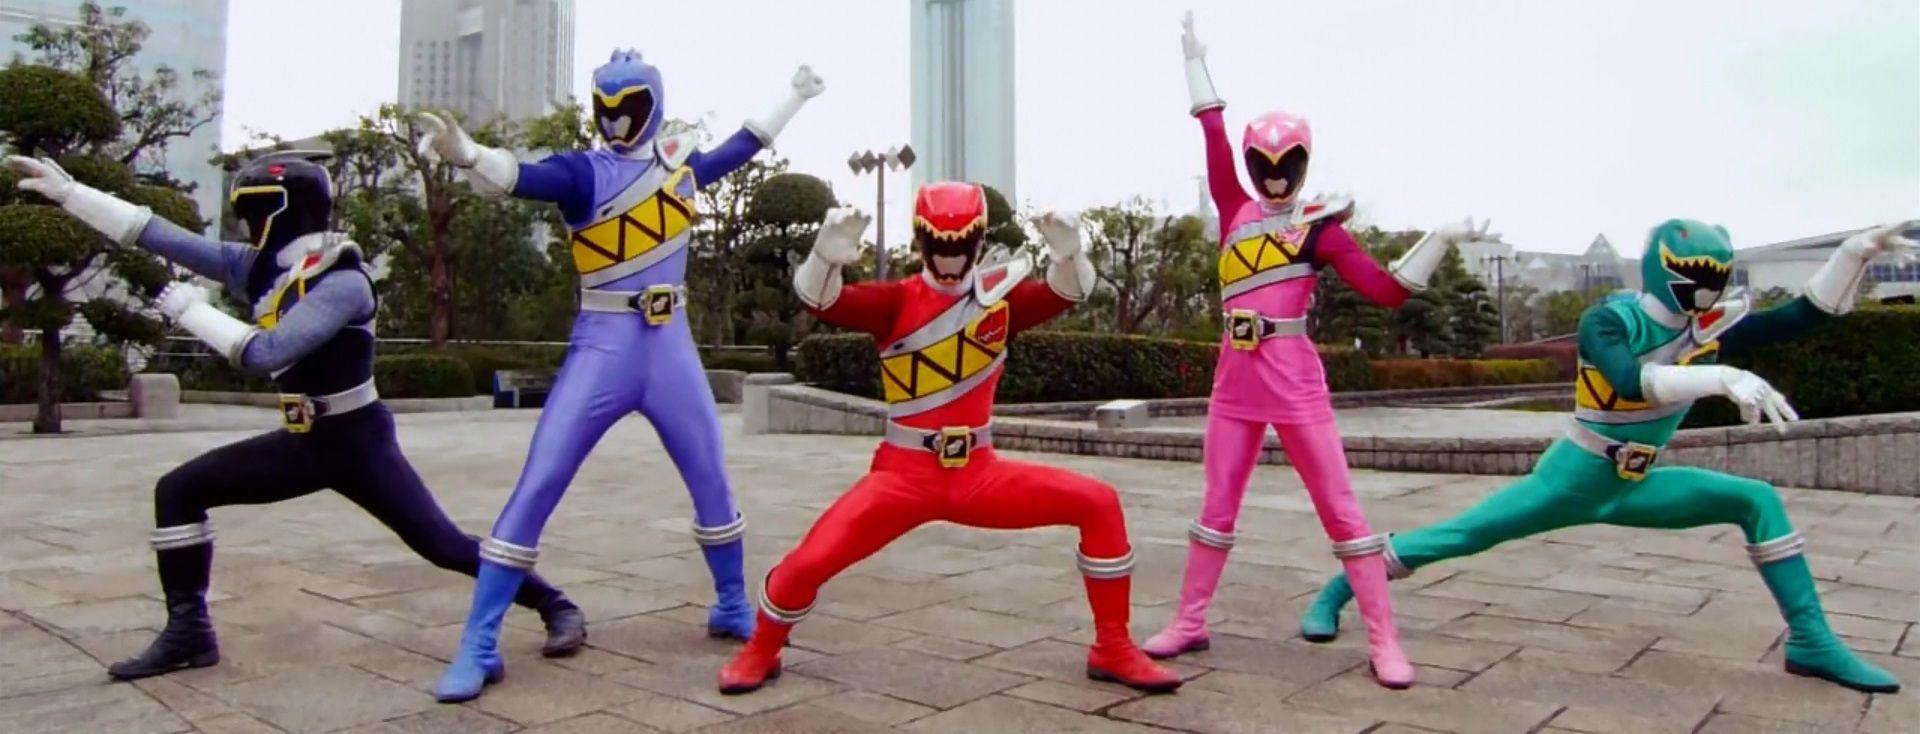 Power Rangers Dino Charge Wallpaper